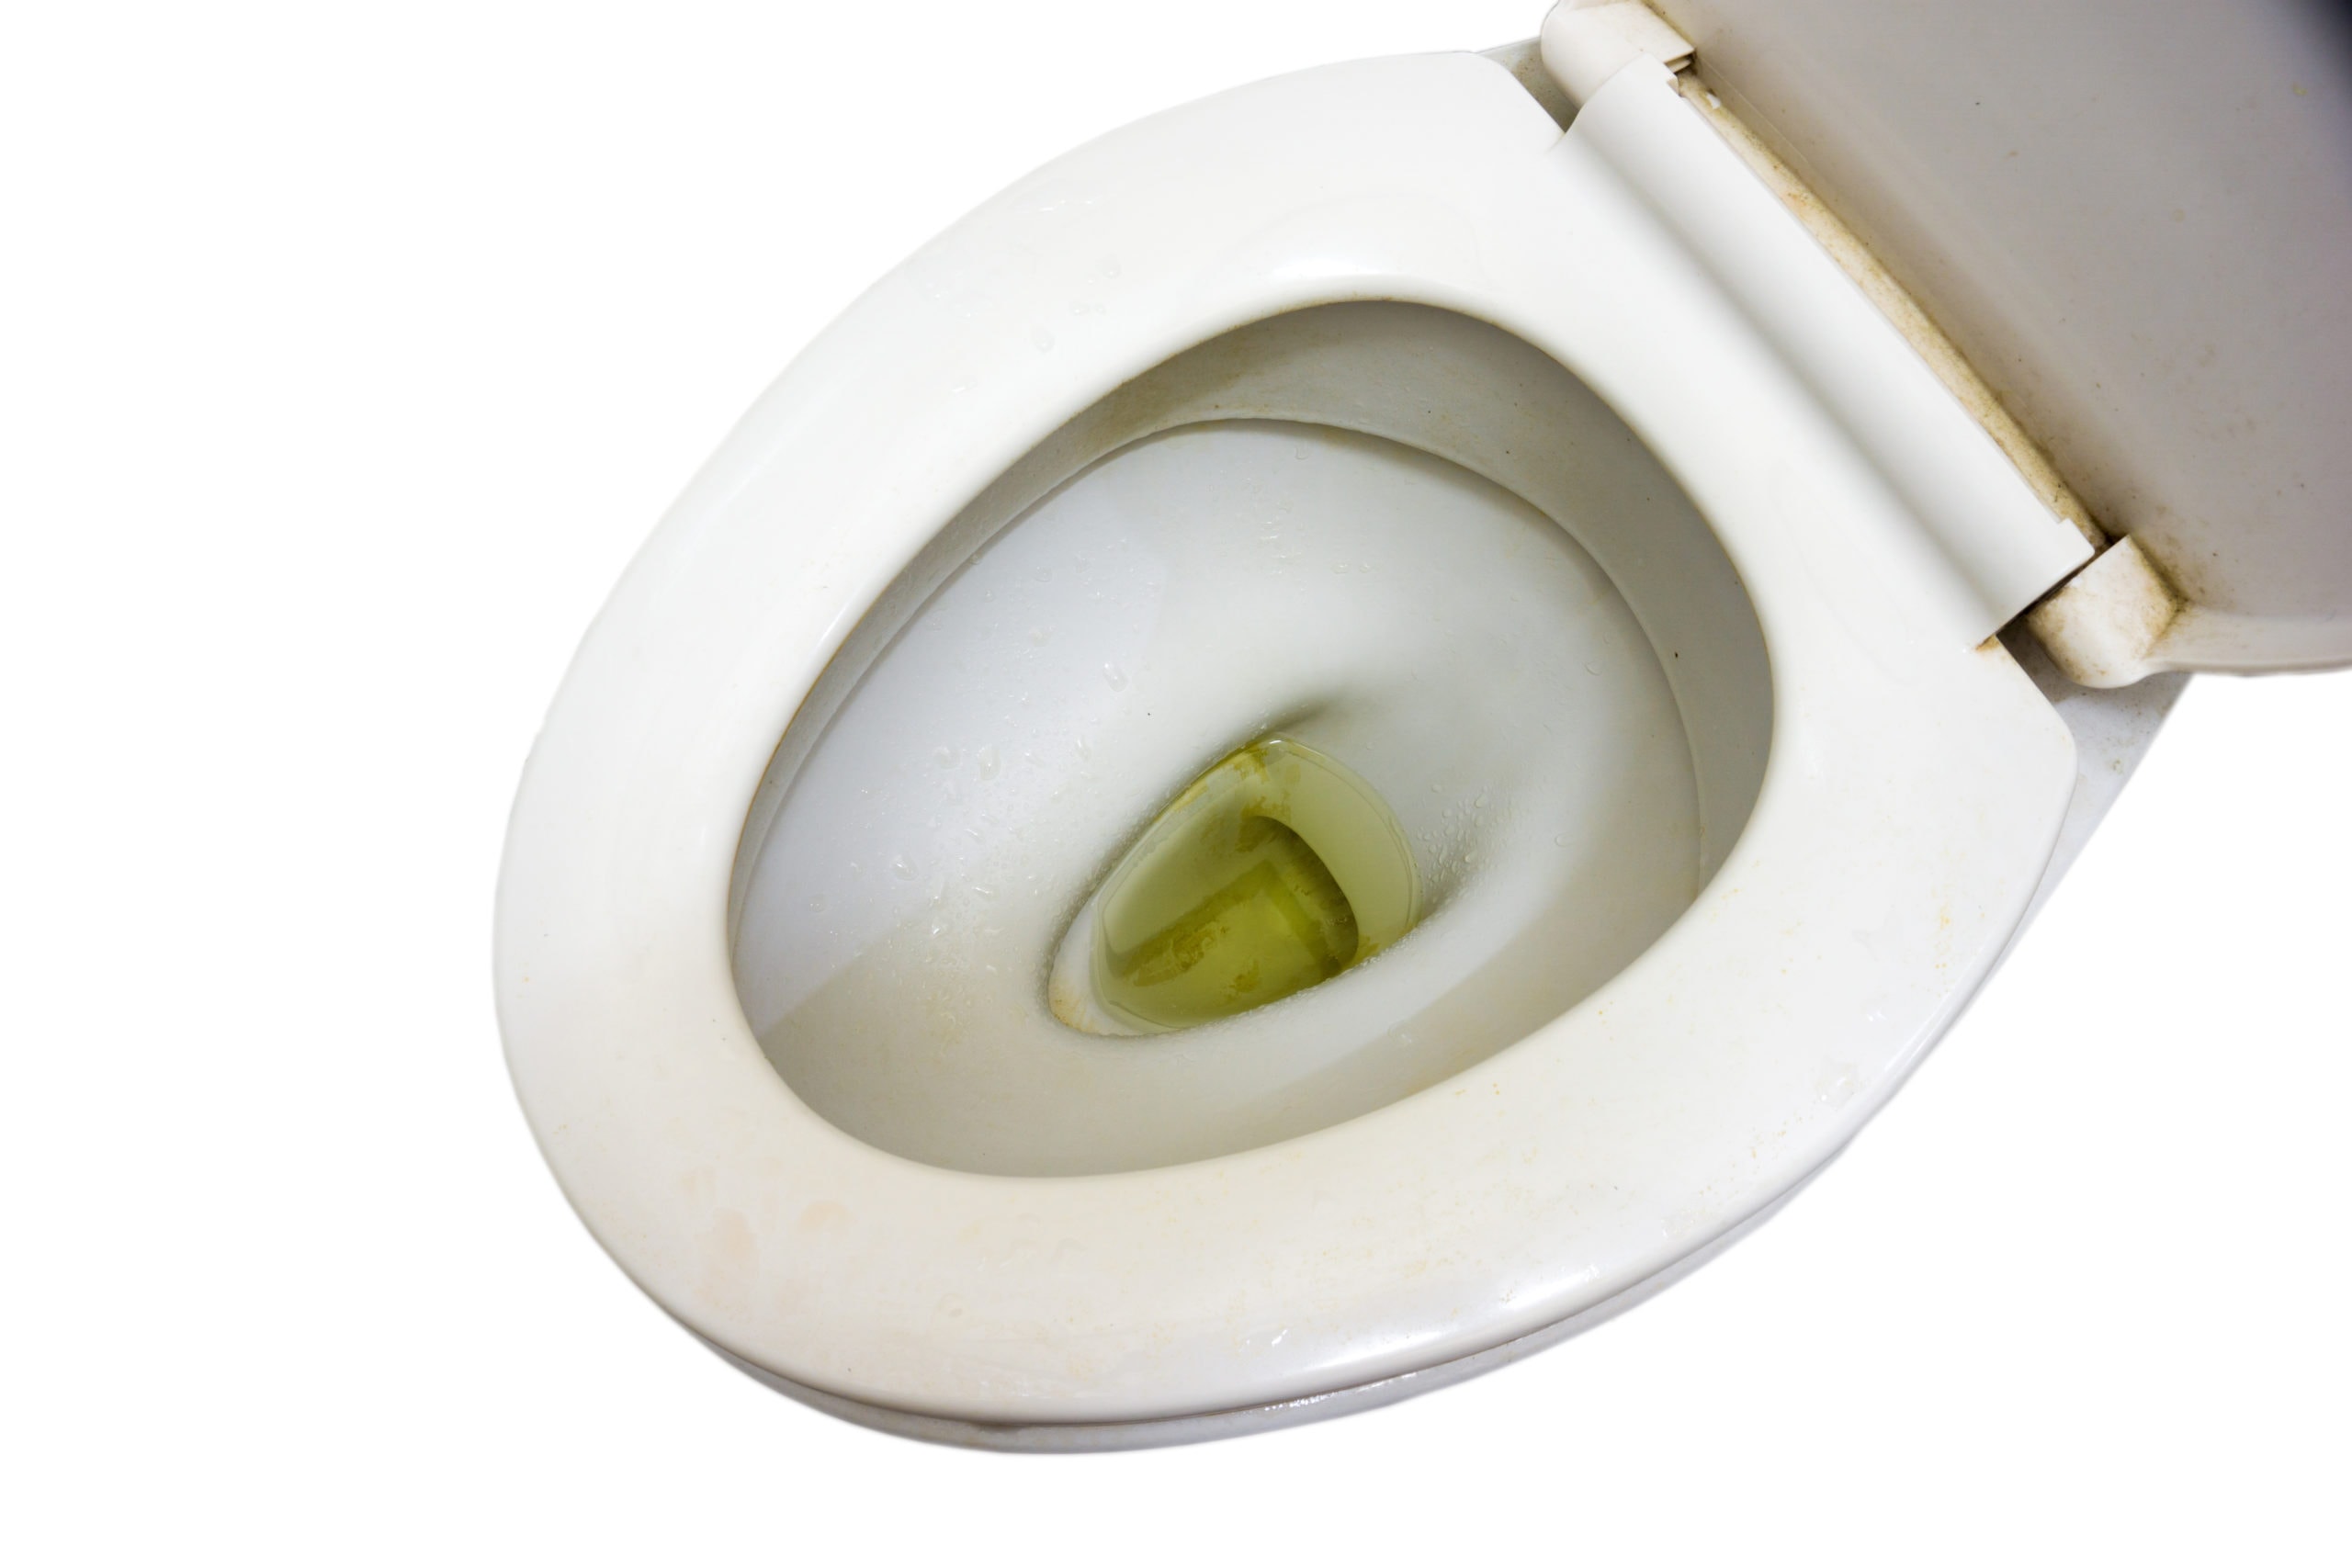 Dirty and unhygienic toilet bowl with limescale stain deposits On a white background